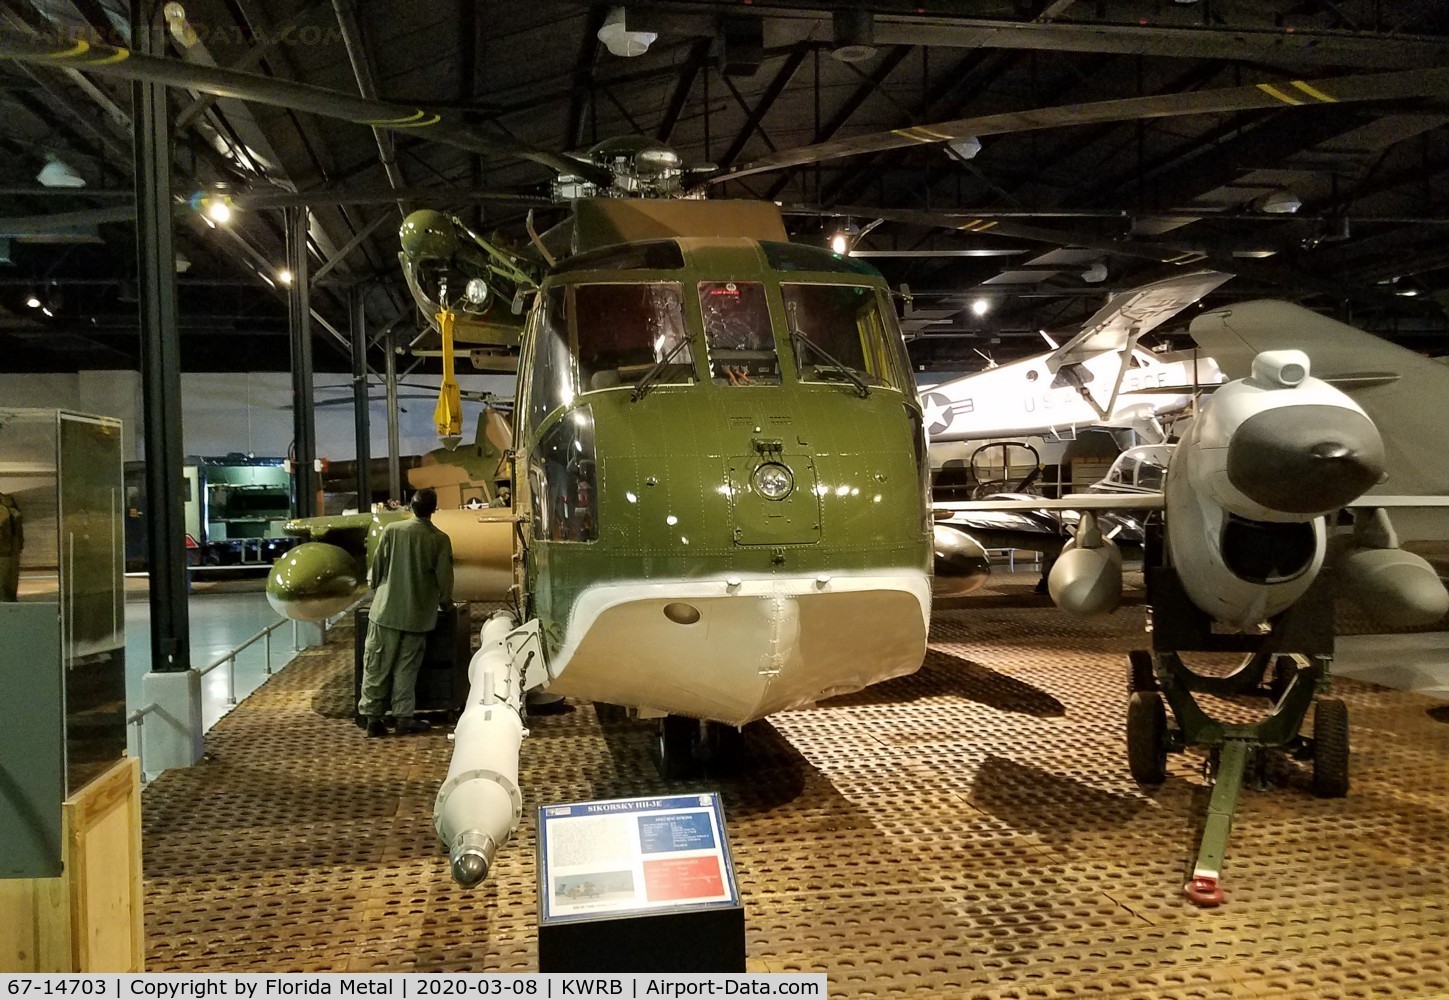 67-14703, 1967 Sikorsky CH-3E Jolly Green Giant C/N 61-605, Jolly Green Giant zx